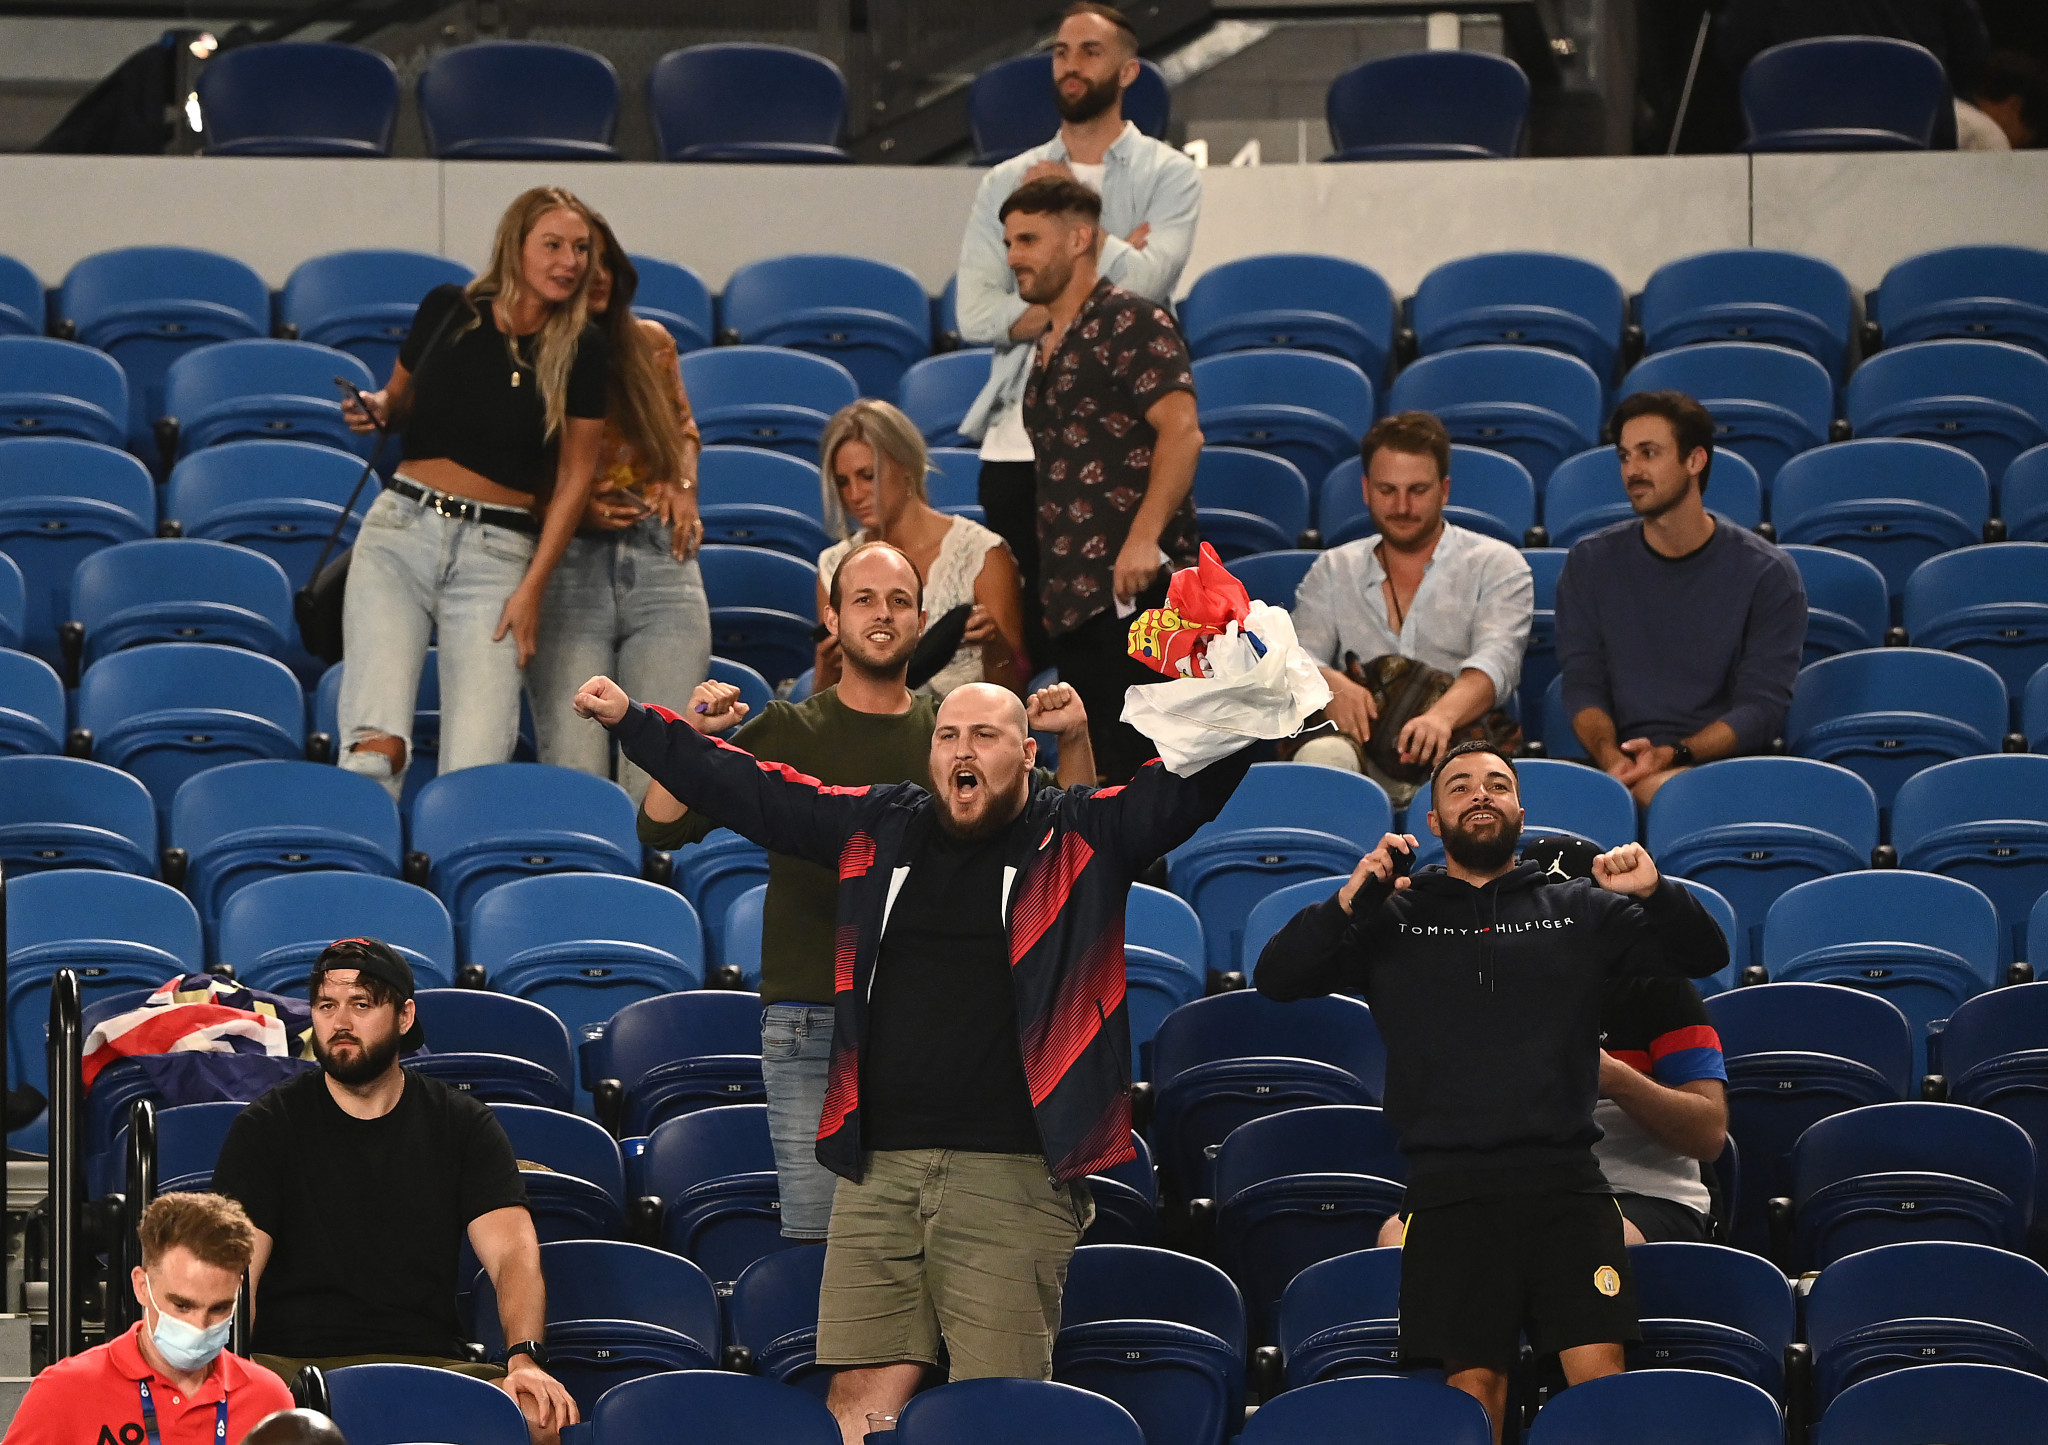 Fans were forced to leave Melbourne Park at 11.30pm local time as a result of a new lockdown in the state of Victoria, despite Novak Djokovic's match still being in progress at the time ©Getty Images